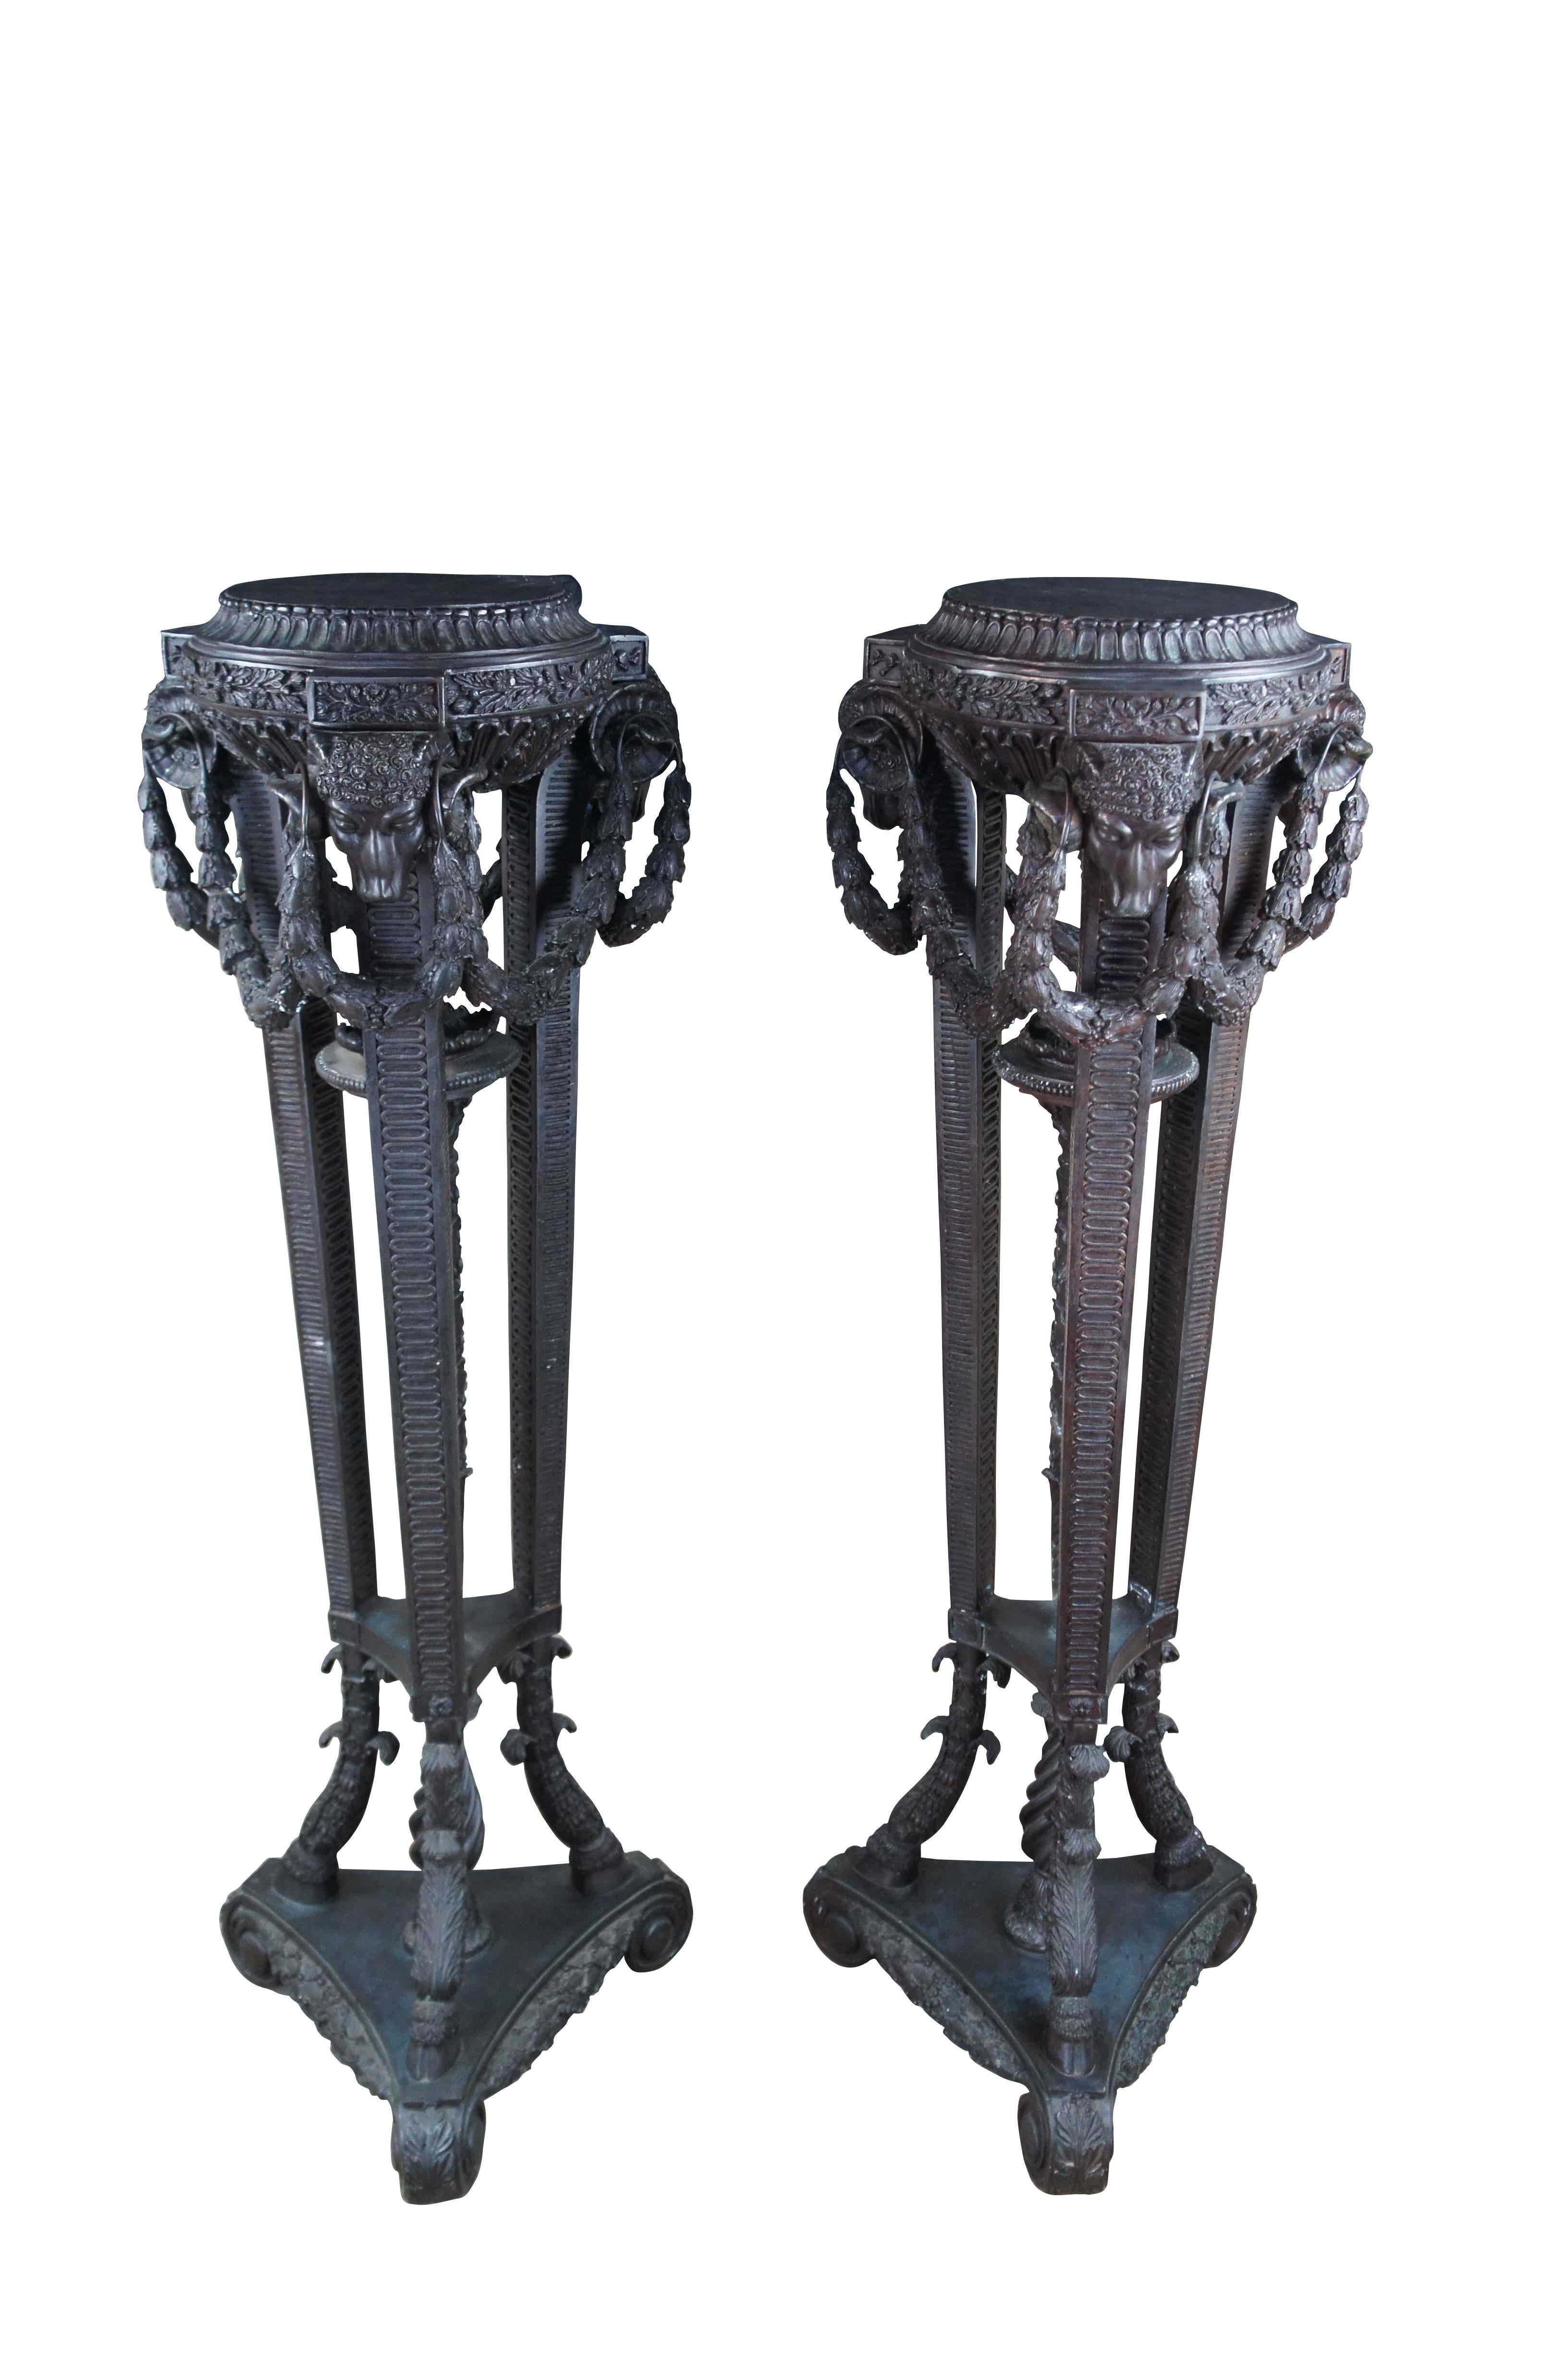 Monumental Pair of French Neoclassical Style Bronze Rams Head Sculpture Pedestals or Plant Stands by Metropolitan Galleries. Cast by the traditional, Lost Wax Bronze Casting method. This labor intensive and time consuming method of casting bronze